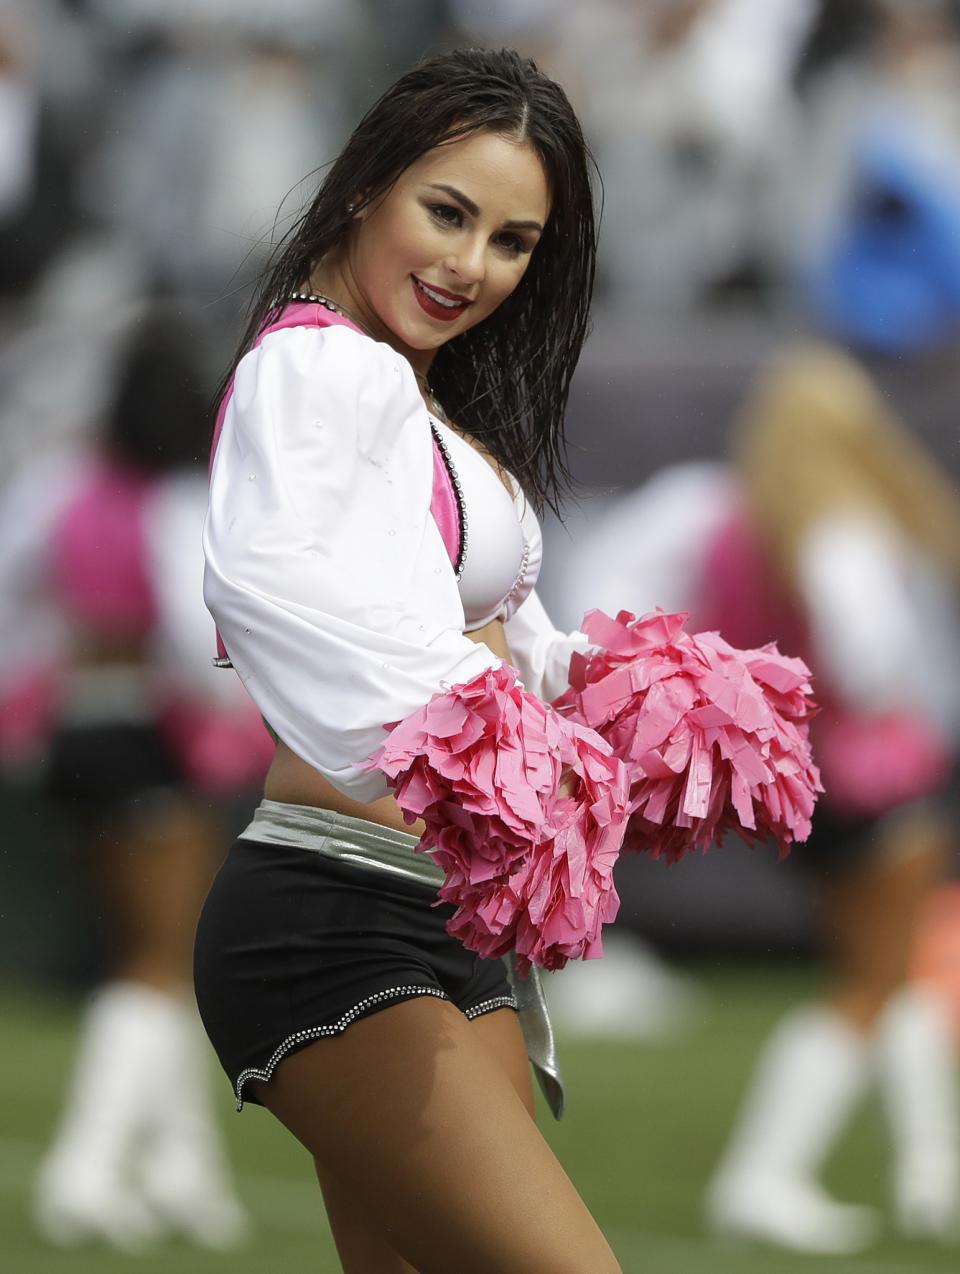 <p>Oakland Raiders cheerleaders perform during the first half of an NFL football game between the Oakland Raiders and the Kansas City Chiefs in Oakland, Calif., Sunday, Oct. 16, 2016. (AP Photo/Marcio Jose Sanchez) </p>